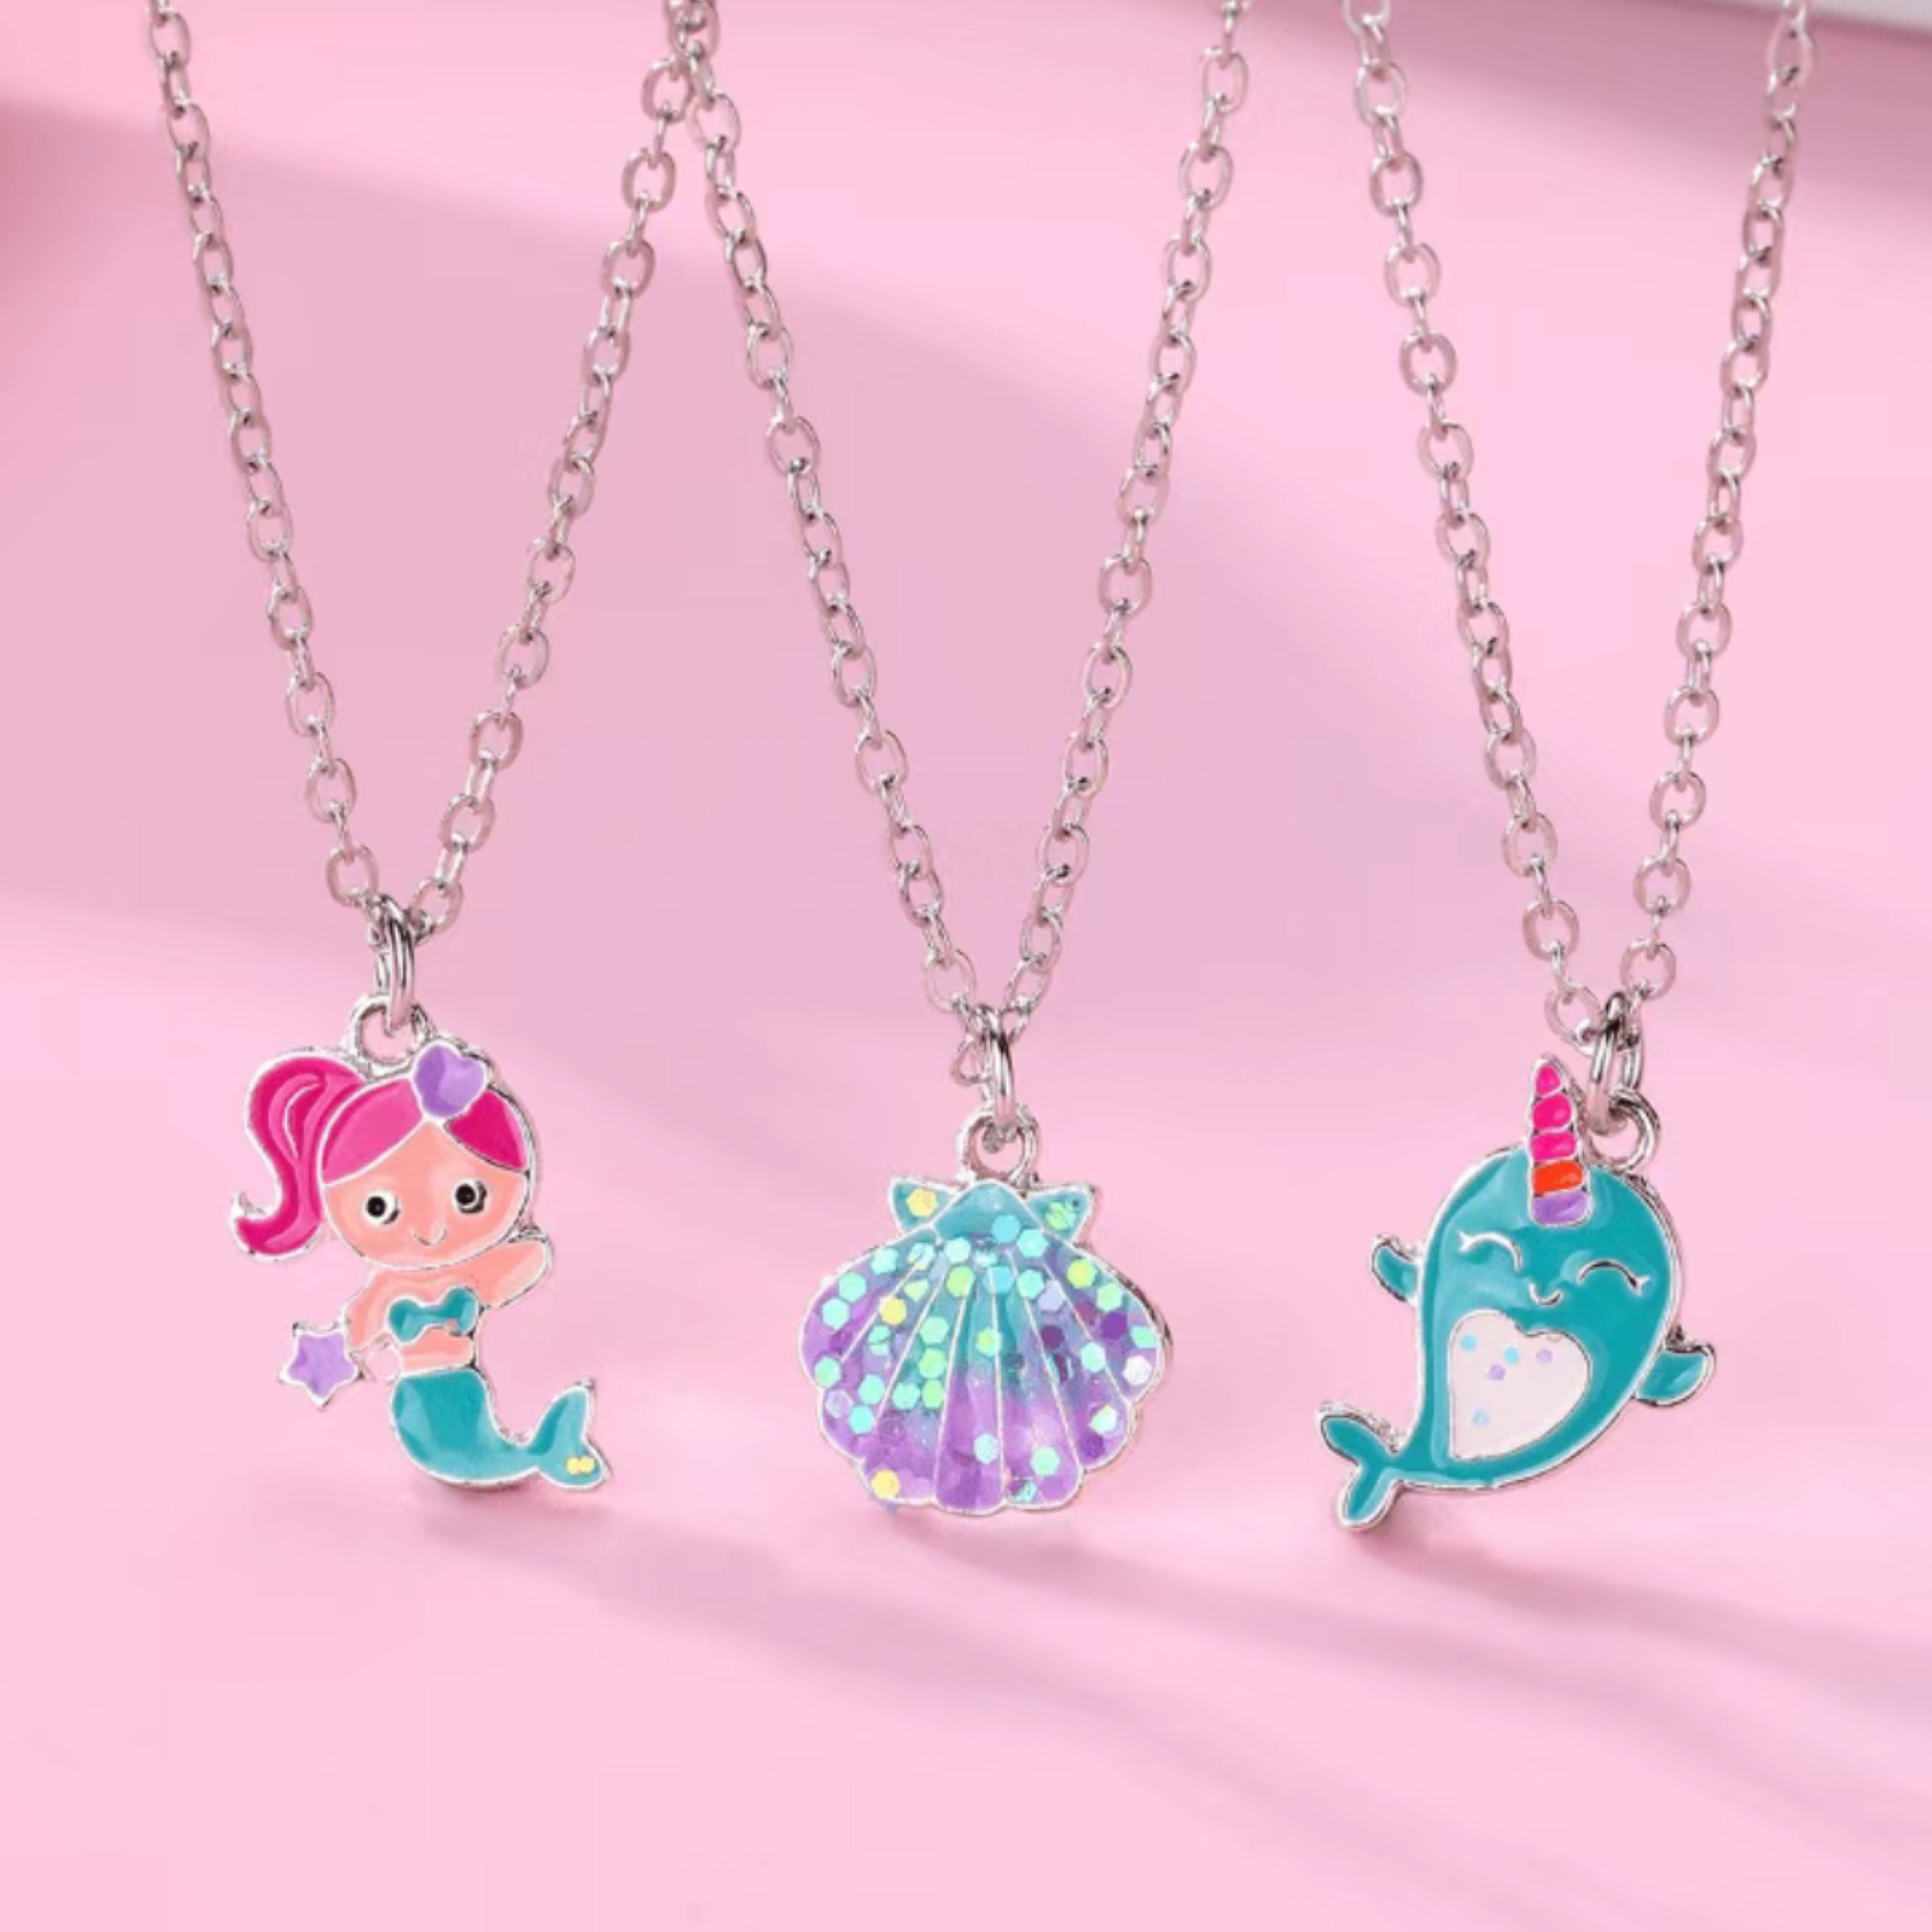 Girls' Necklaces